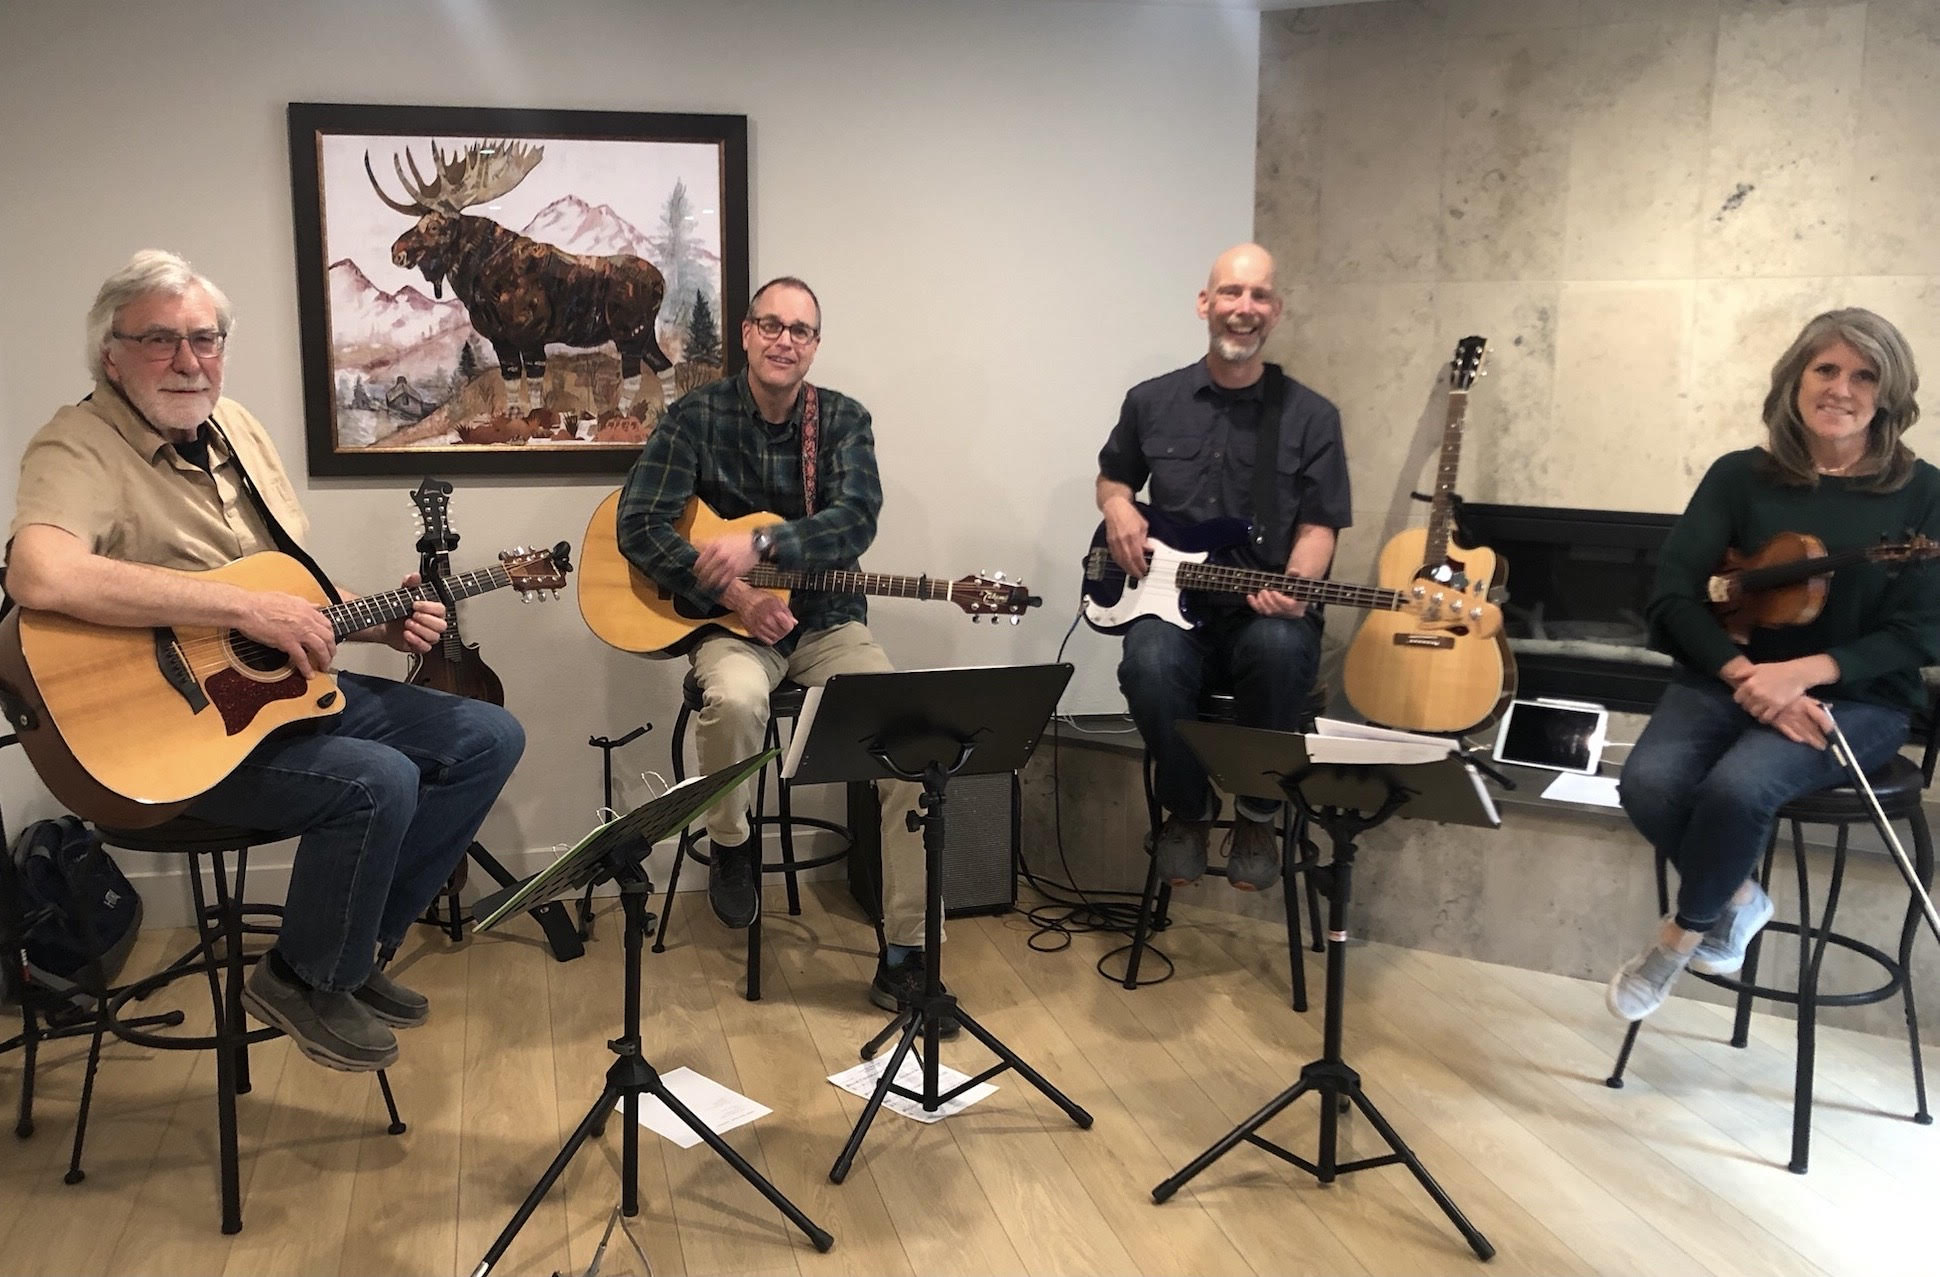 The Lost Creek String Band poses in front of a painting of a Moose.